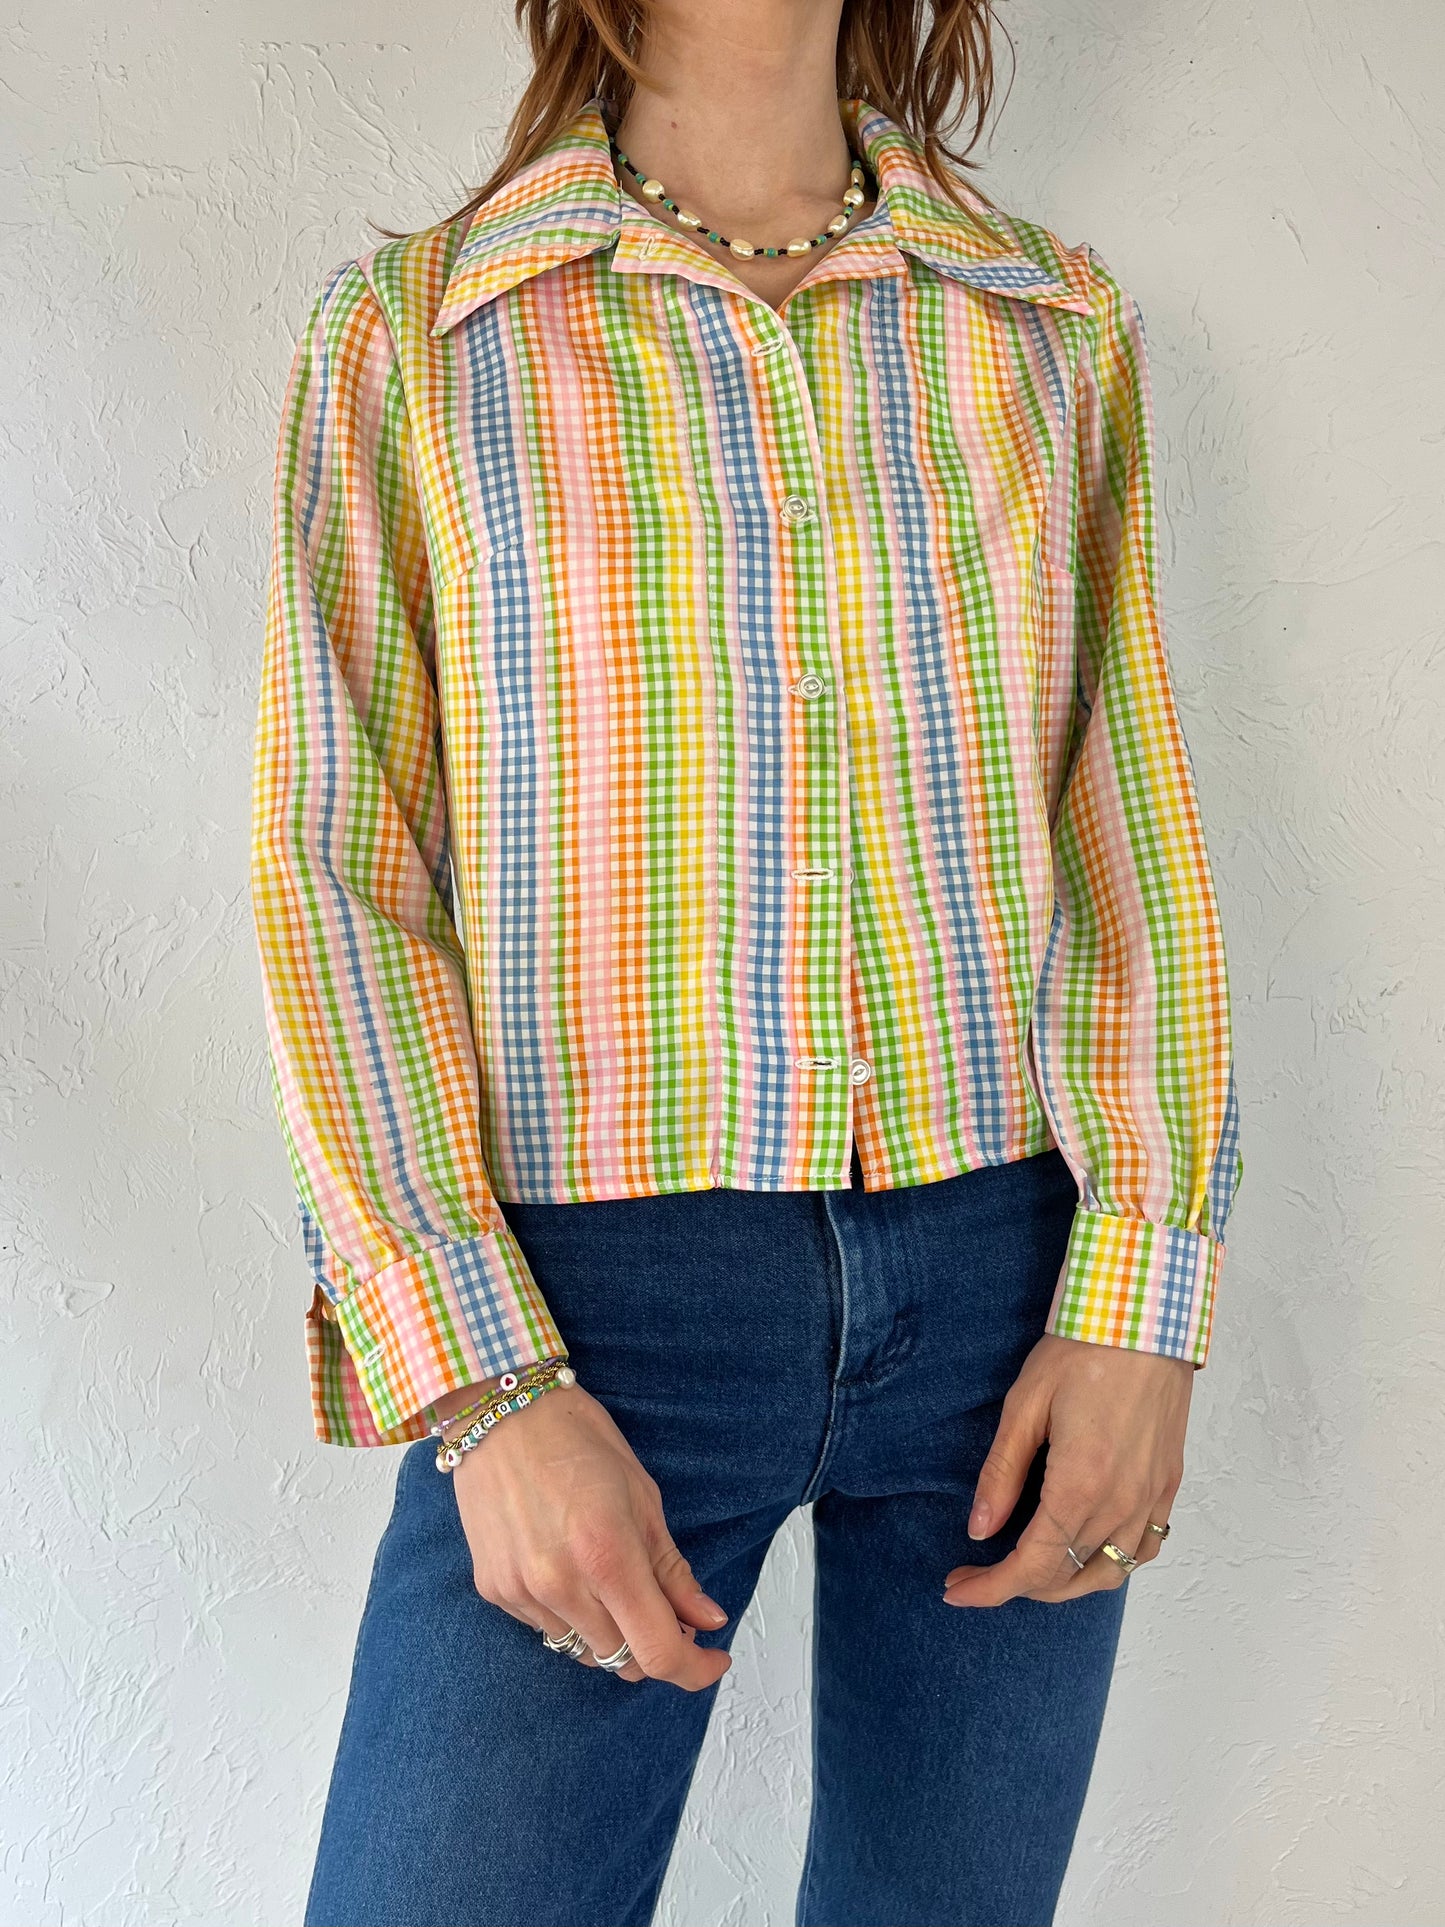 70s Rainbow Gingham Button Up Shirt / Small